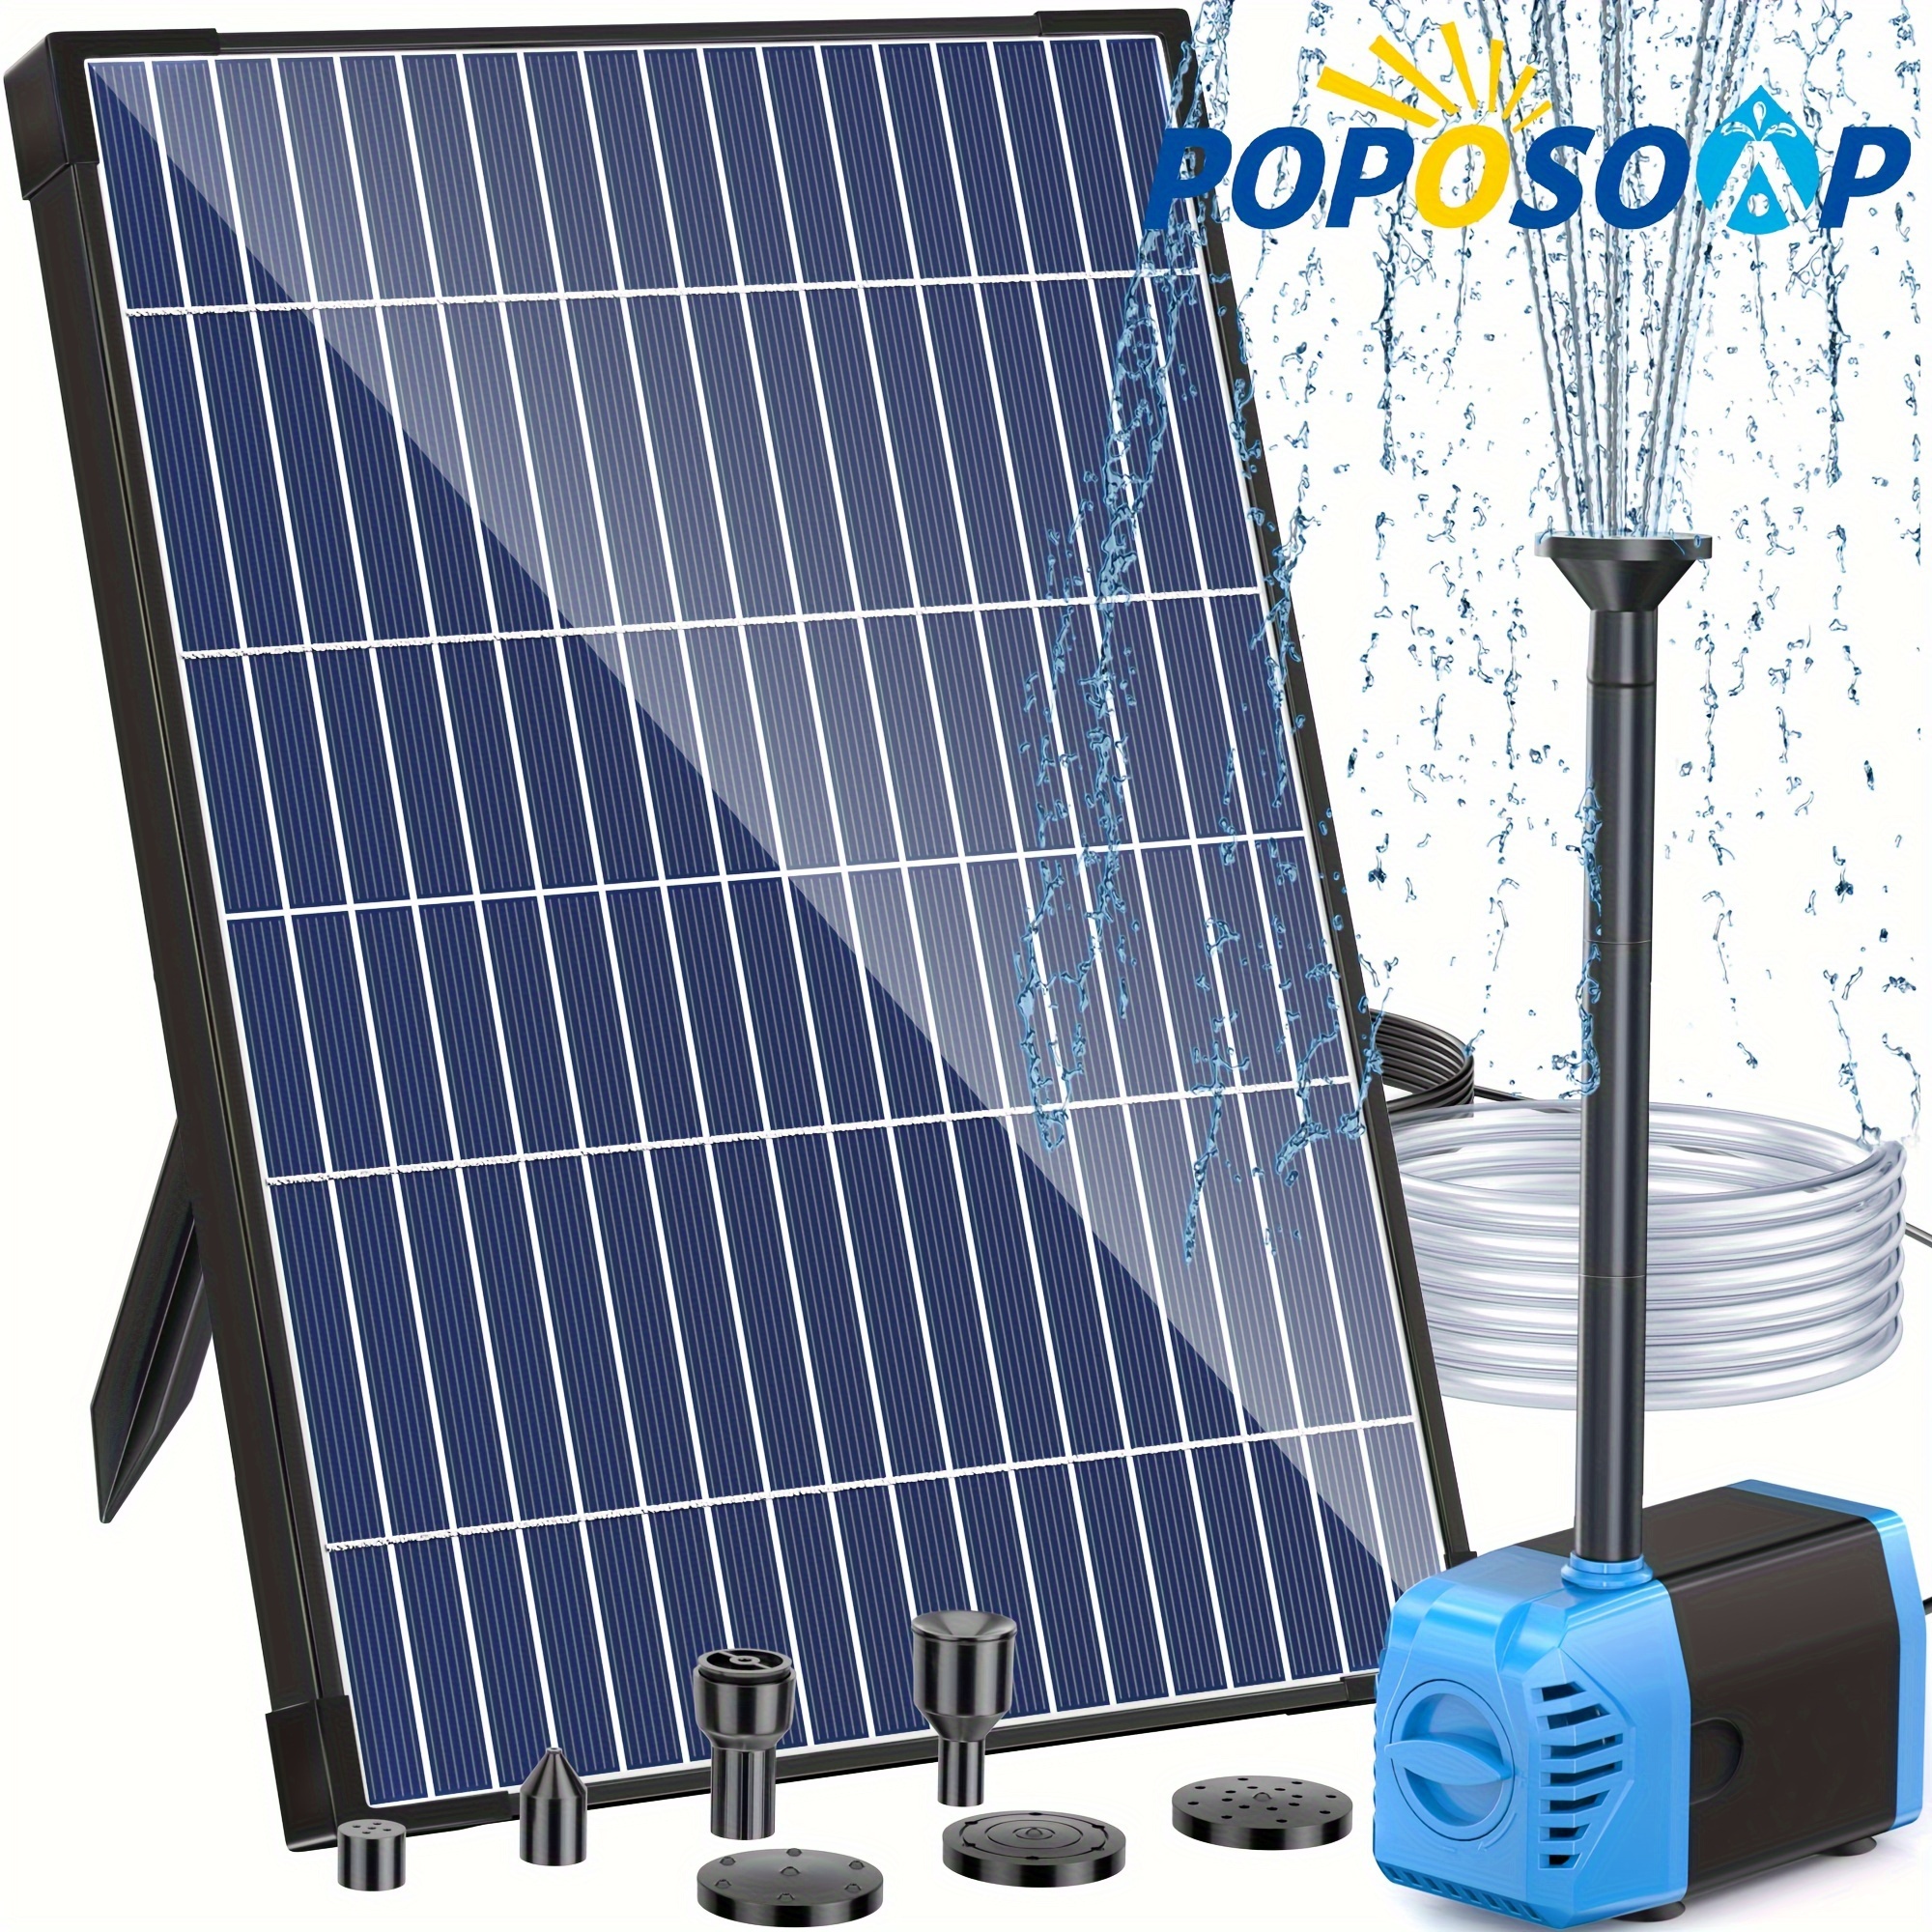 

Poposoap Solar Water Pump, 12w Solar Fountain Pump 160gph Flow Adjustable, Solar Powered Water Pump With Dry-run, 17ft Cord Length For Pond, Fish Pond, Wildlife Garden, Waterfall, Hydroponics